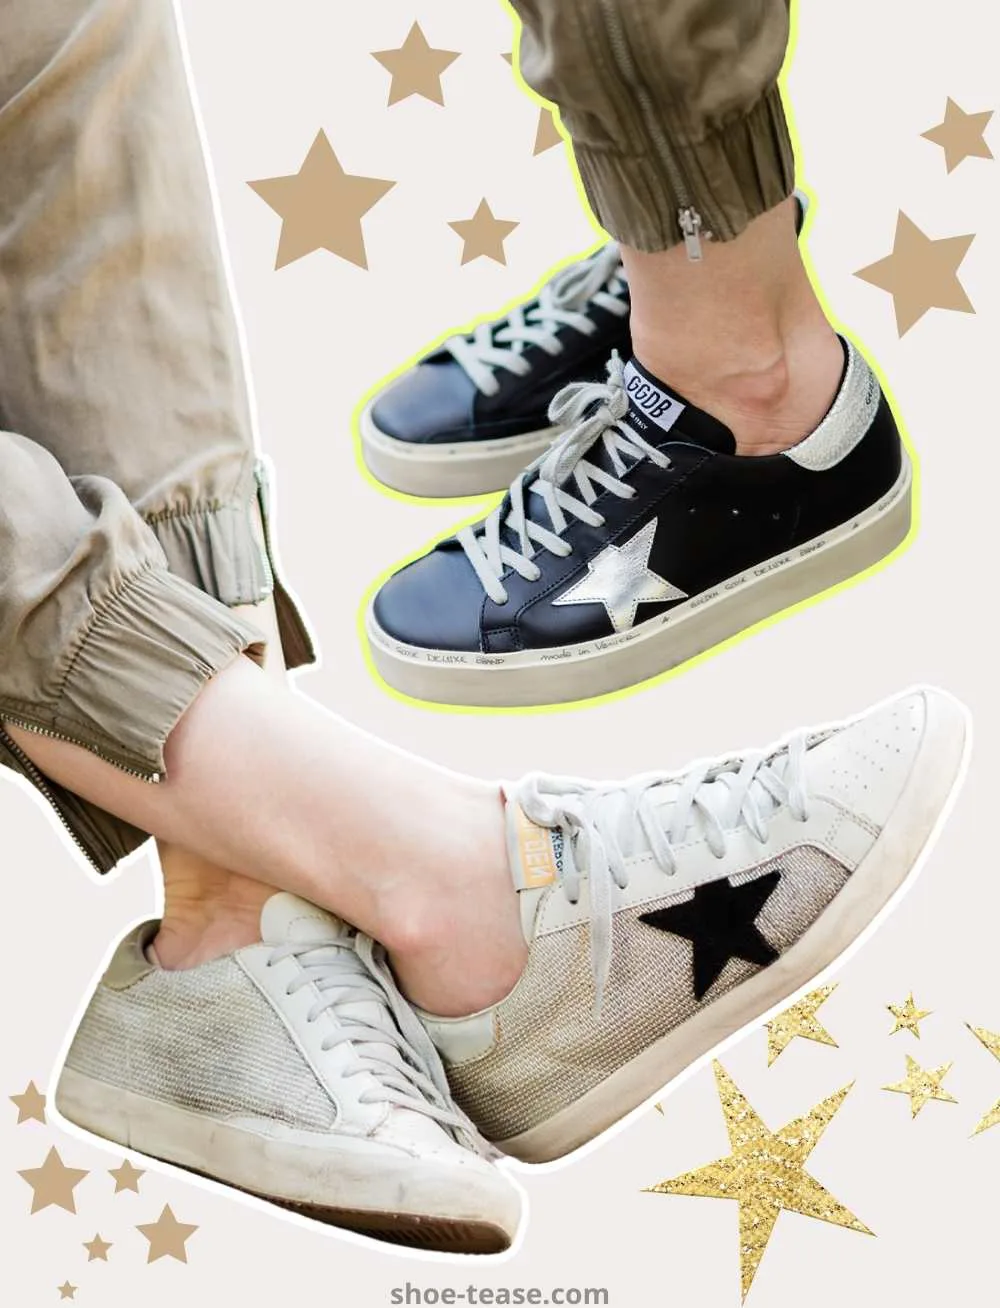 Close up of women wearing Golden Goose sneakers with stars.